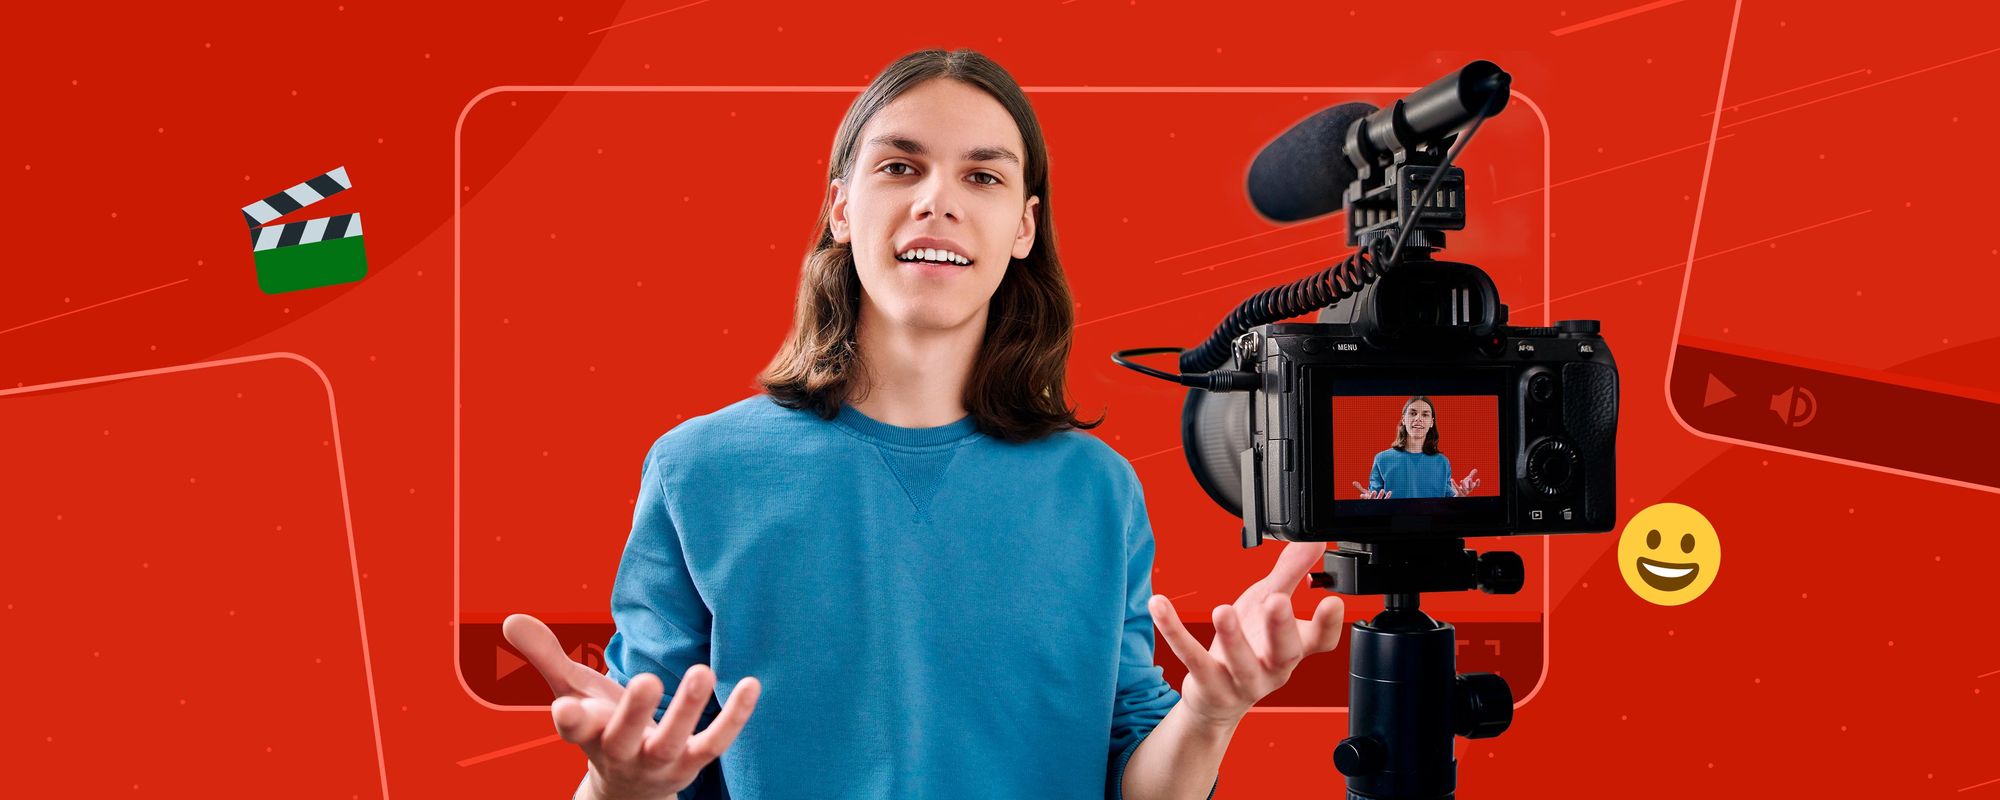 Image of a creator filming himself for a YouTube video.